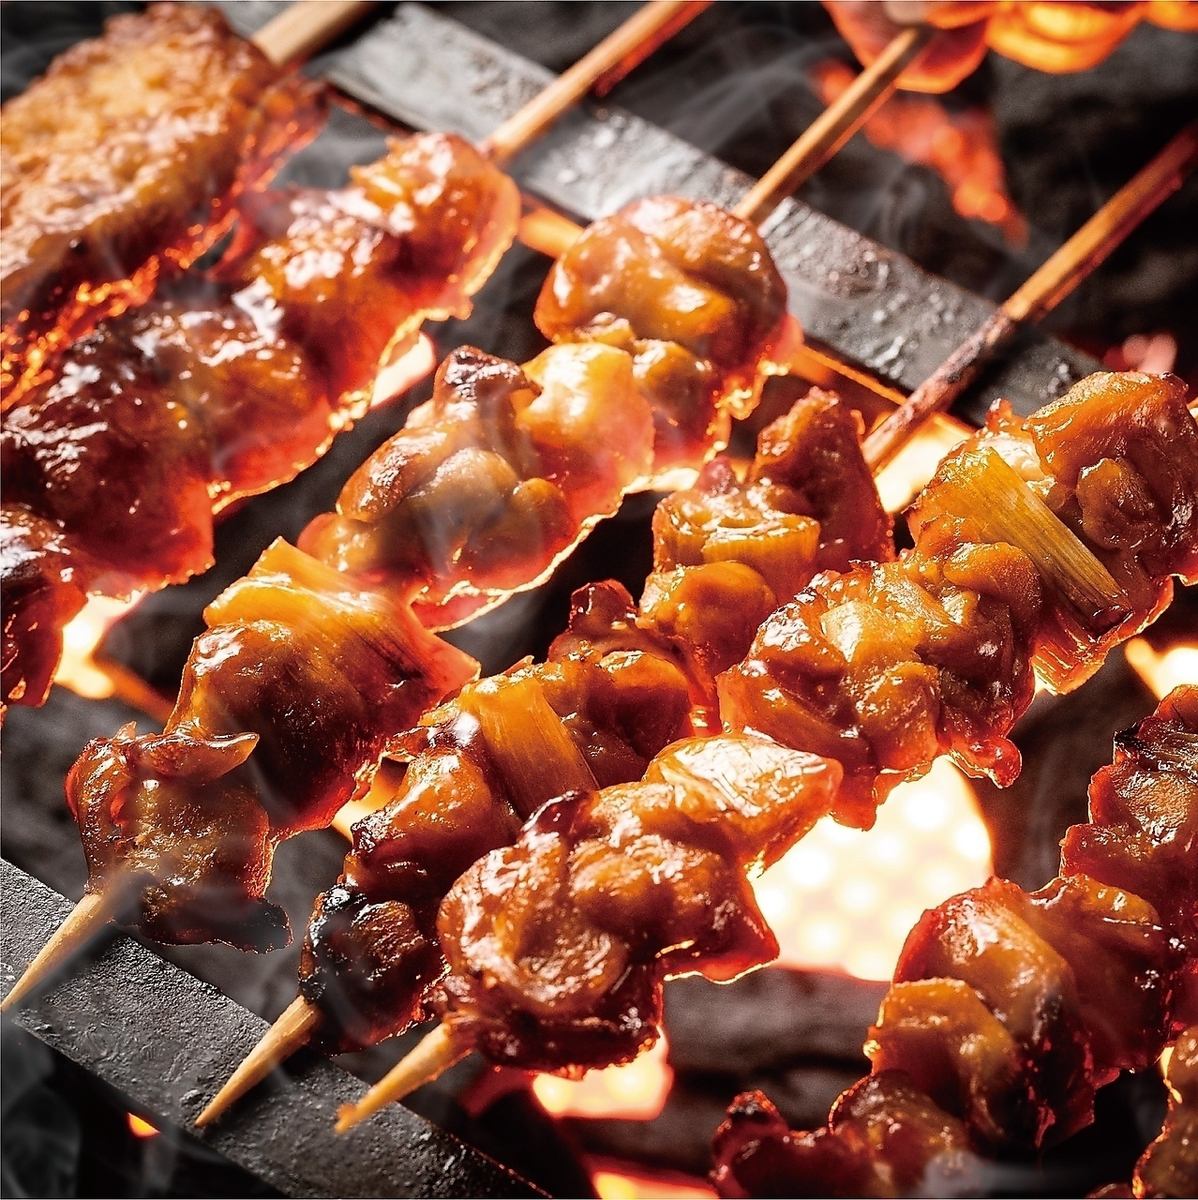 [NEW OPEN] Only available for meals such as yakitori, seafood, and Japanese cuisine◎